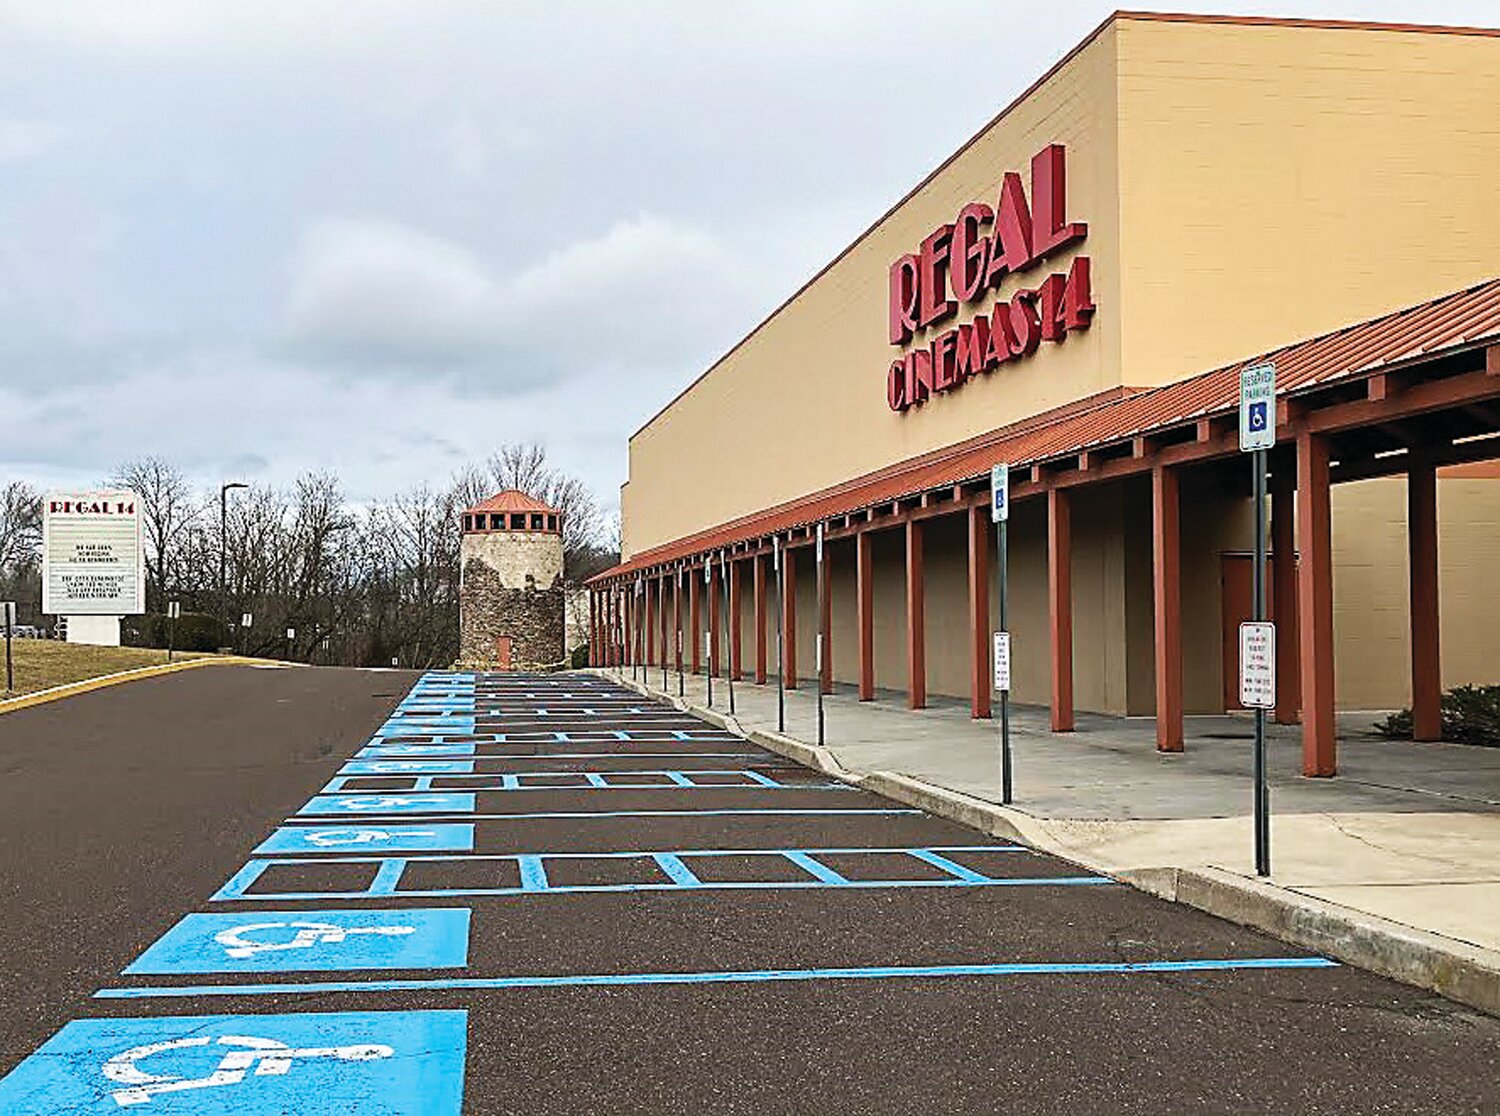 The Regal Barn Cinema in Doylestown Township closed its doors for good on Feb. 9.